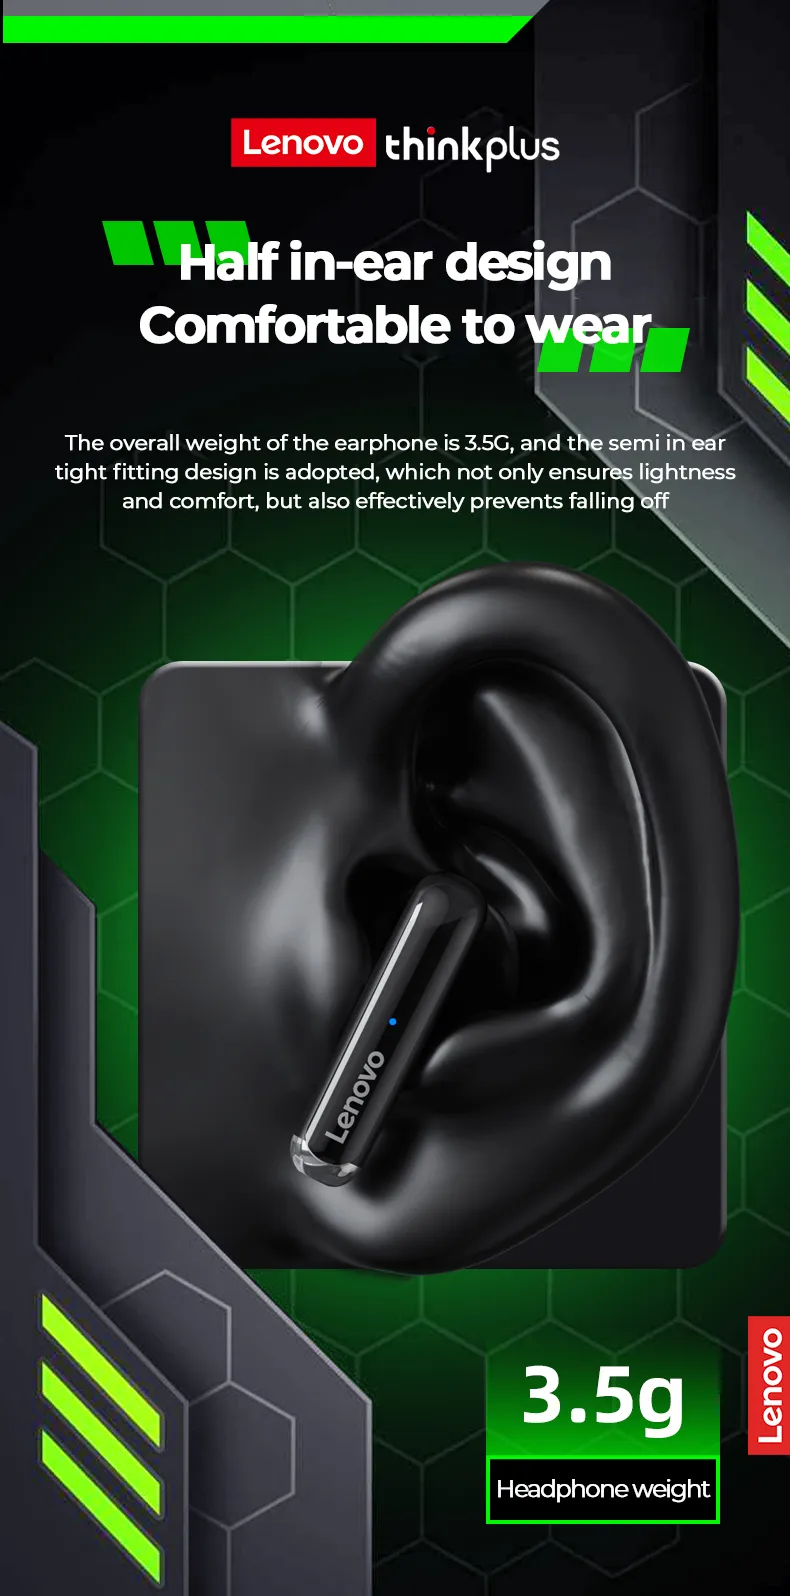 Lenovo &Lt;H1&Gt;Lenovo Xt81 True Wireless Headphones - Black&Lt;/H1&Gt; Https://Www.youtube.com/Watch?V=9J9Zjh8Taso &Lt;Ul&Gt; &Lt;Li&Gt;Bluetooth V5.3, Support Most Bluetooth Devices And Lower Power Consumption&Lt;/Li&Gt; &Lt;Li&Gt;250Mah Charging Case Can Fully Charge 2 Earphones Around 5 Times, Give You More 24 Hours Of Music Time&Lt;/Li&Gt; &Lt;Li&Gt;With Waterproof Technology, No Longer Need To Worry About Water And Sweat&Lt;/Li&Gt; &Lt;Li&Gt;13Mm Dual Drive Units, Enjoy Strong 9D Deep Bass Music Sound&Lt;/Li&Gt; &Lt;Li&Gt;Popular Touch Control Function, Support Switch Songs, Phone Call And Subscriber Voice Call&Lt;/Li&Gt; &Lt;/Ul&Gt; &Lt;Strong&Gt;Features:&Lt;/Strong&Gt; &Lt;A Href=&Quot;Https://Lablaab.com/?S=Earbuds&Amp;Post_Type=Product&Amp;Product_Cat=0&Quot;&Gt;More Products&Lt;/A&Gt; &Lt;B&Gt;We Also Provide International Wholesale And Retail Shipping To All Gcc Countries: Saudi Arabia, Qatar, Oman, Kuwait, Bahrain. &Lt;/B&Gt; &Lt;Pre&Gt;&Lt;/Pre&Gt; Lenovo Lenovo Xt81 True Wireless Headphones - Black